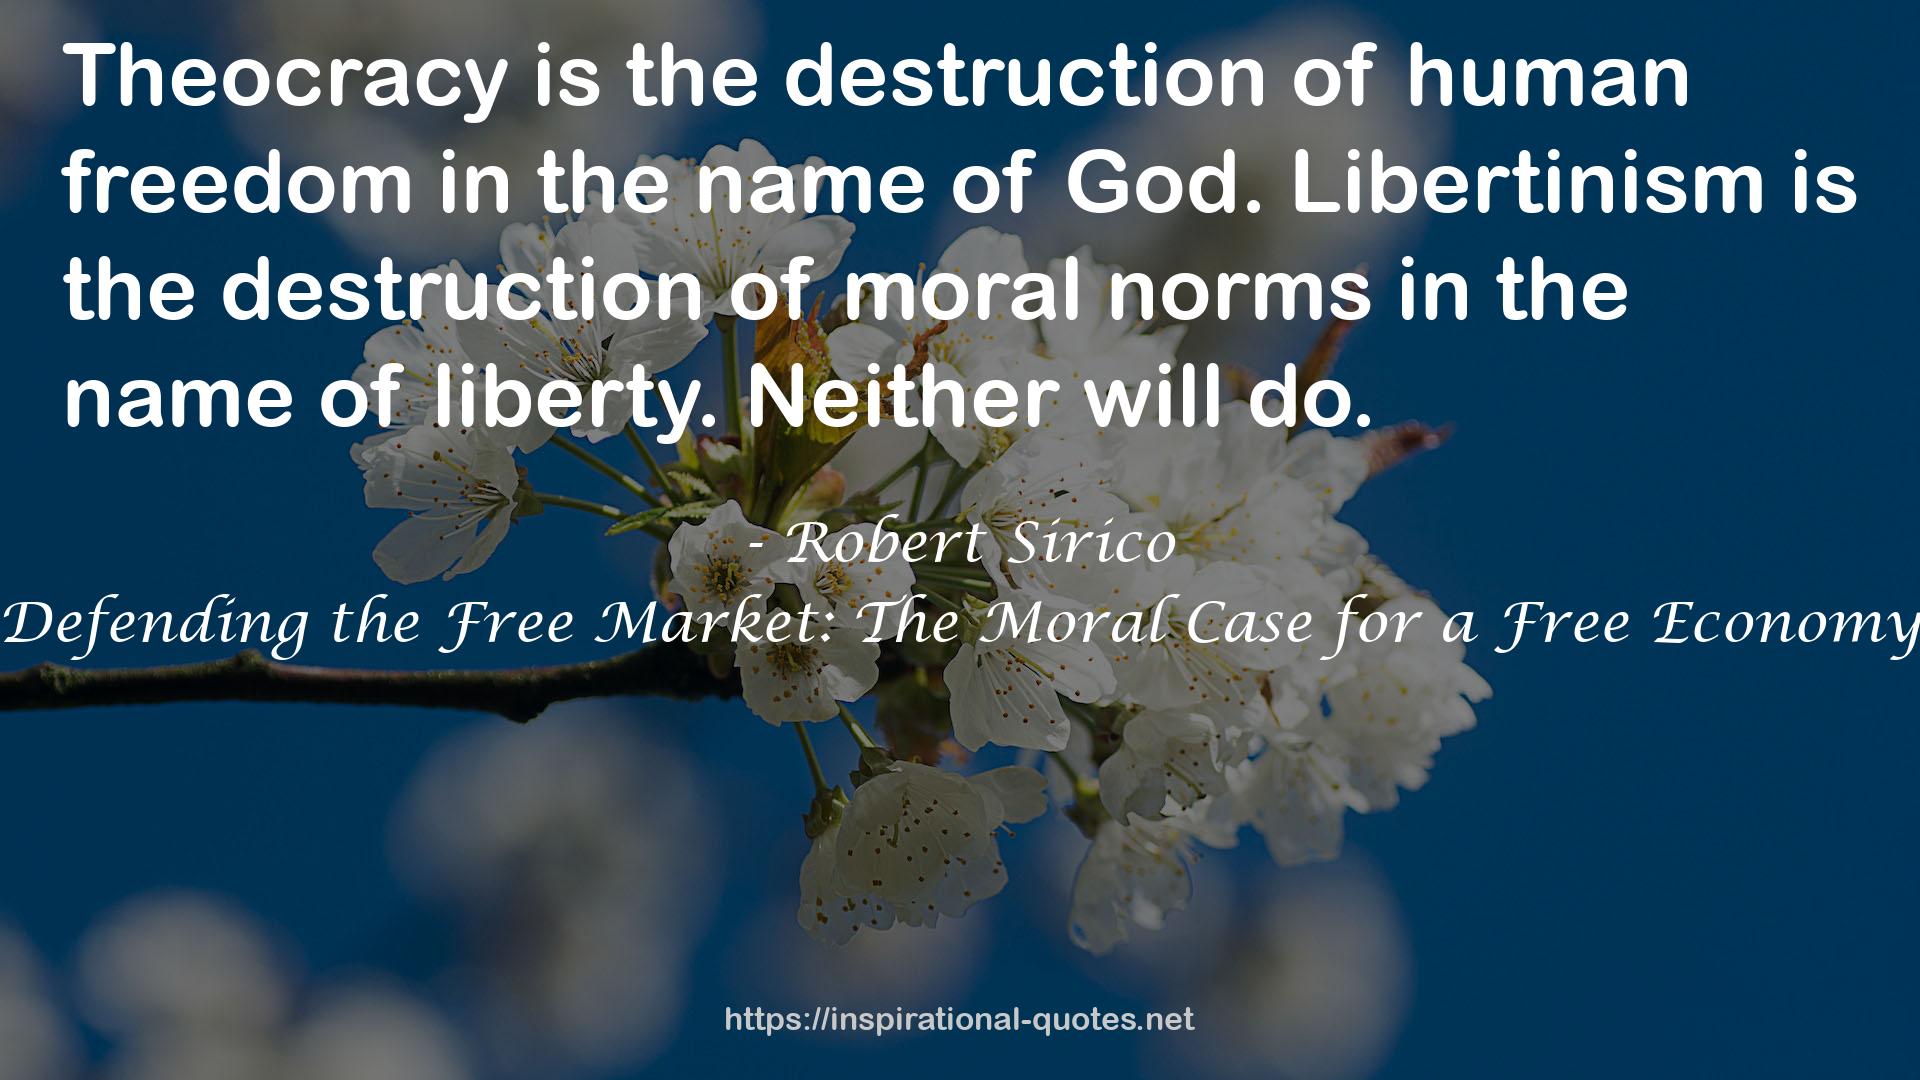 Defending the Free Market: The Moral Case for a Free Economy QUOTES